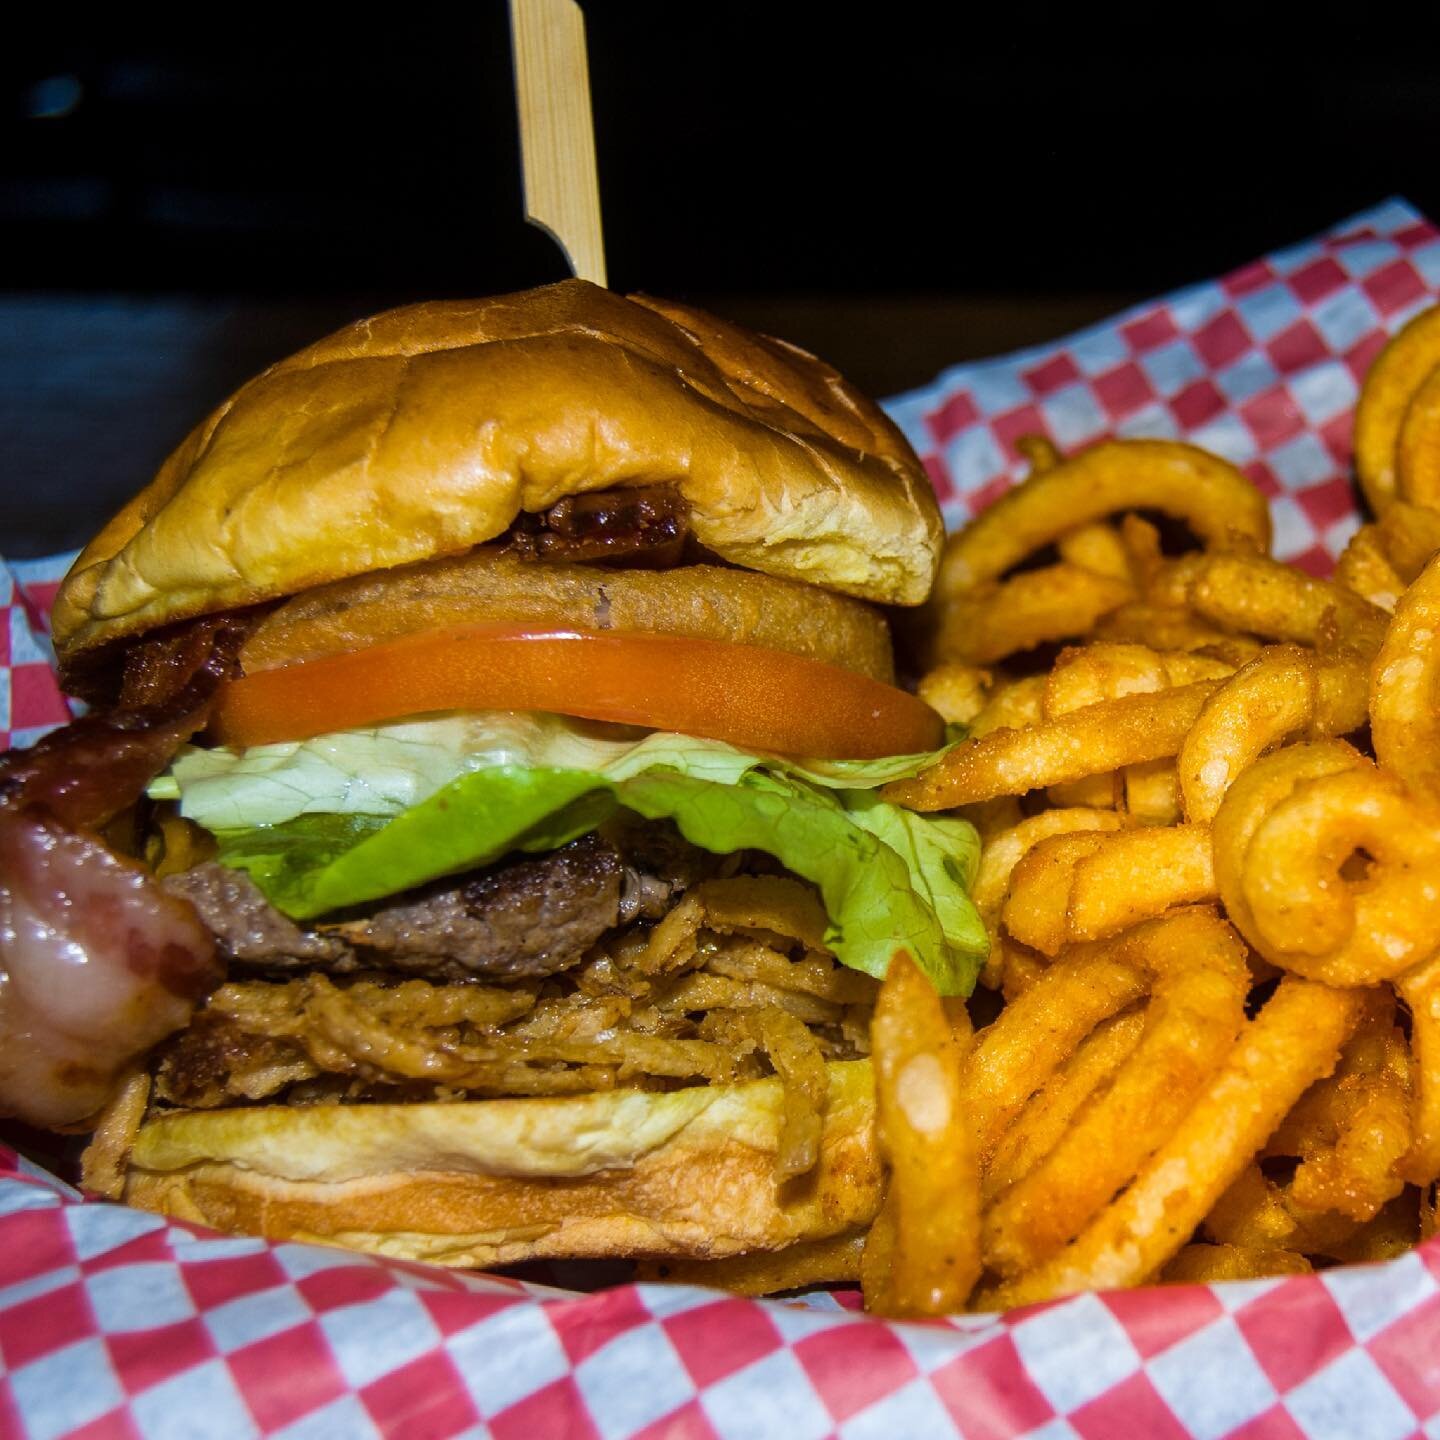 🚨JULY B.O.M.B. ALERT🚨
Come try our Cowboy Burger! 
6 oz patty topped with an onion ring, thick cut bacon, lettuce, beefsteak tomato, cheddar cheese, boylan and barbecue sauce, and served with our curly fries!